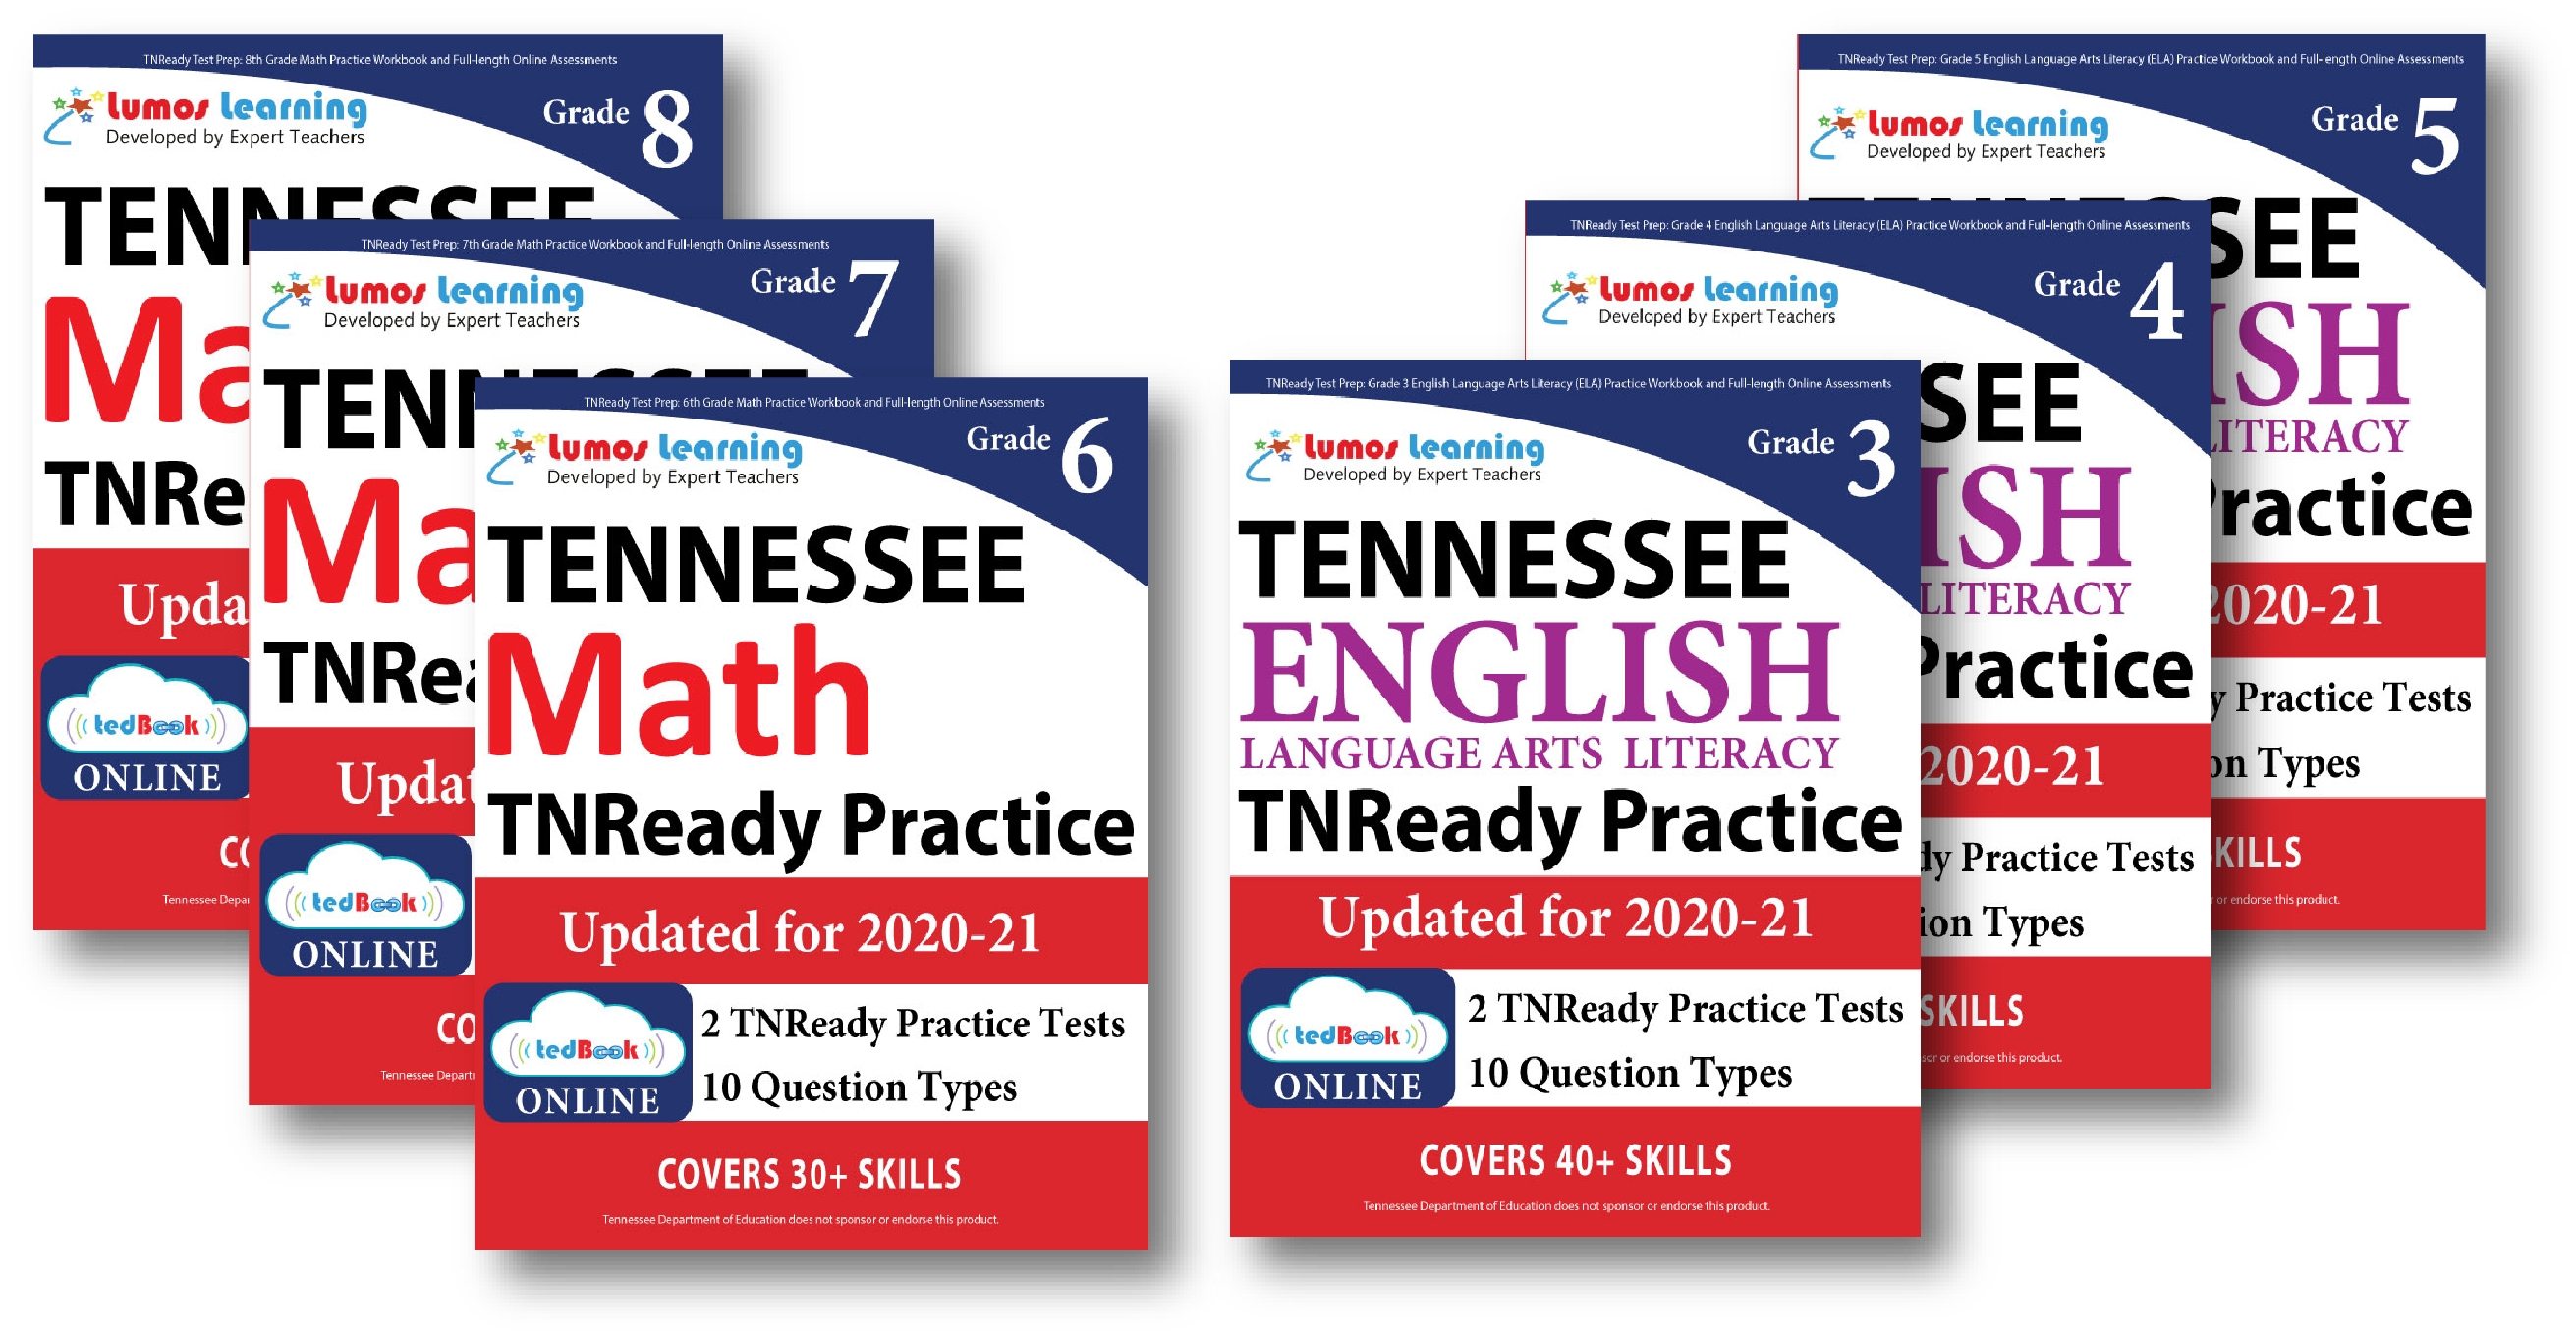 tnready-practice-rehearsal-resources-for-elementary-middle-schools